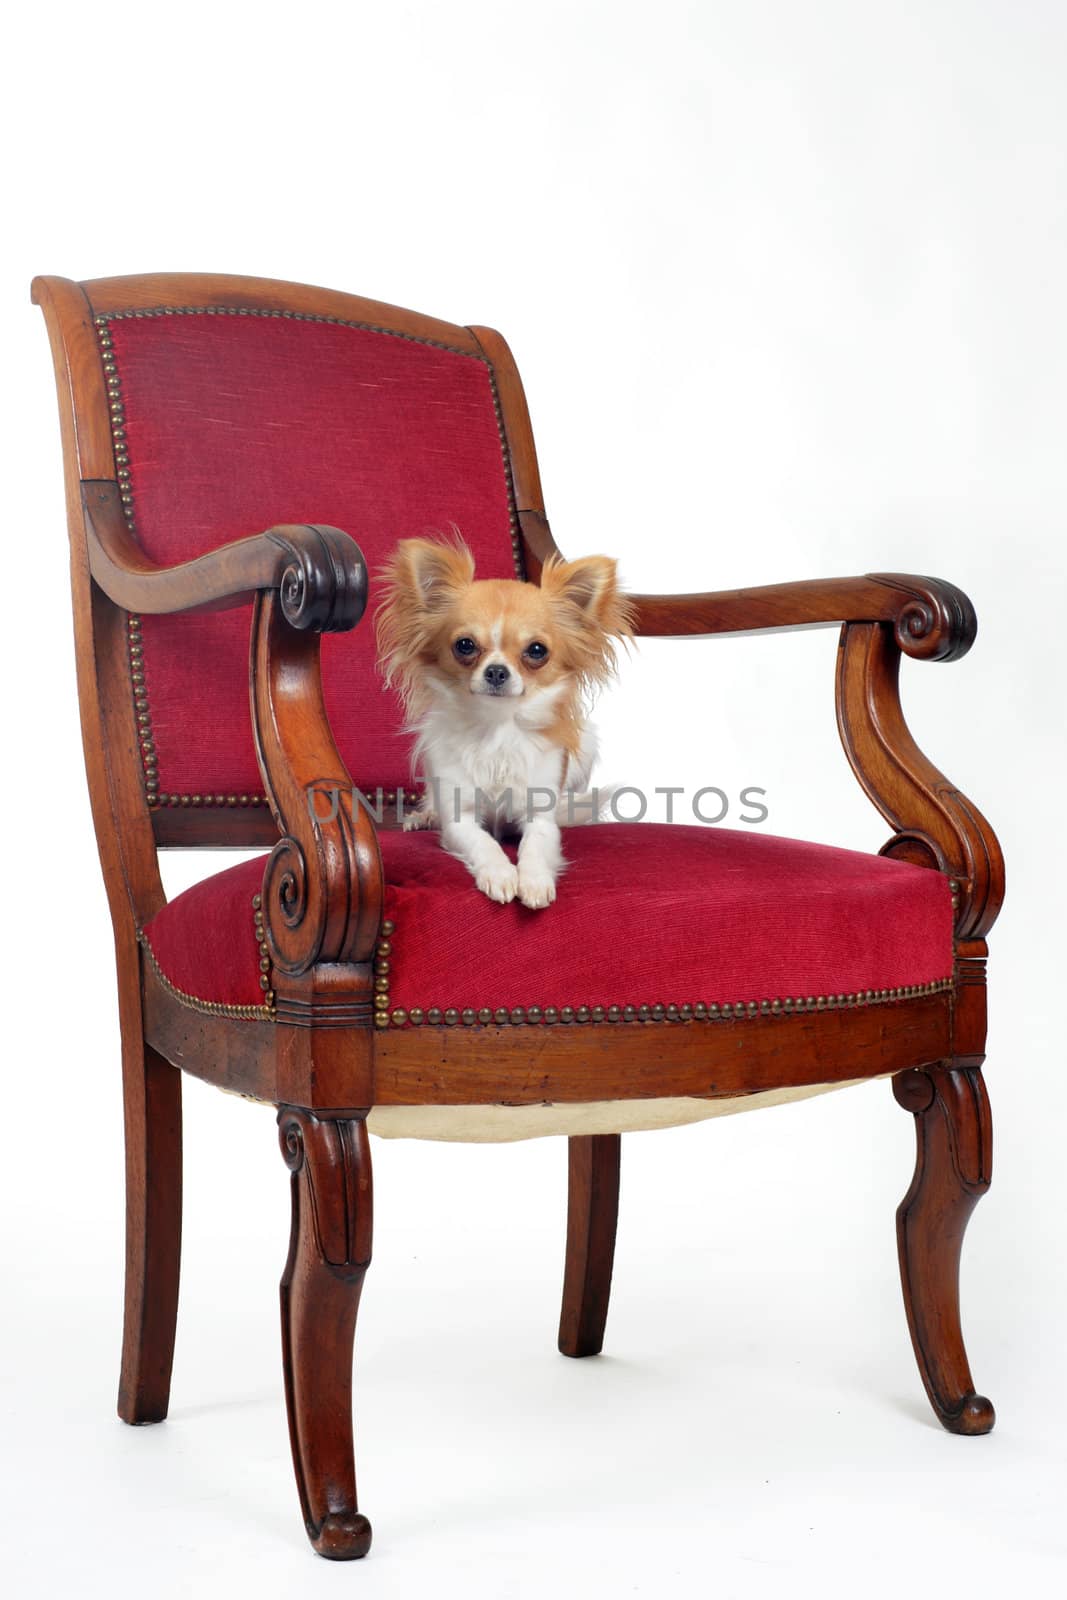 chihuahua laid down on an antique chair in front of white background